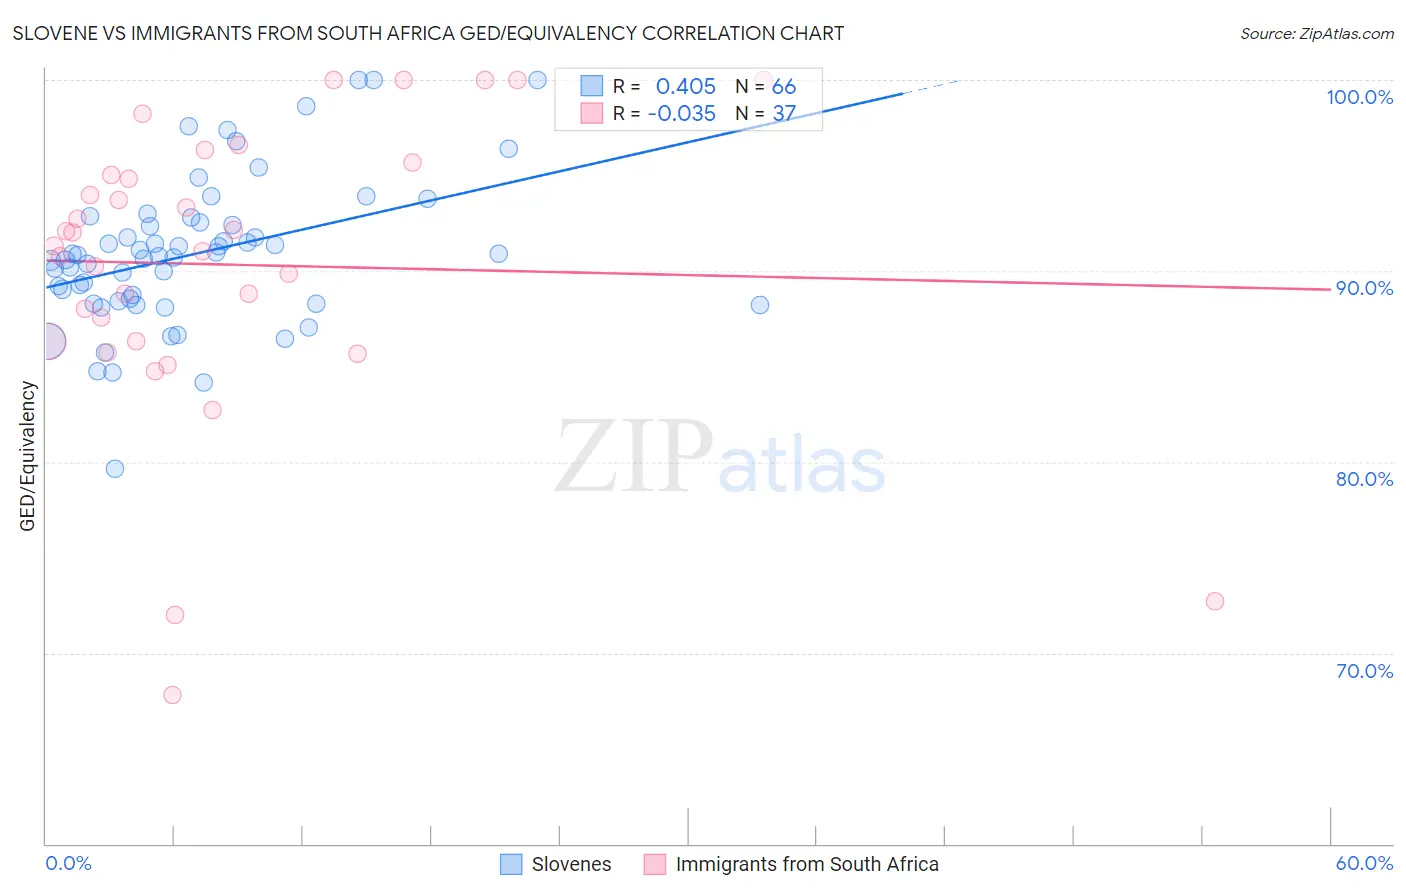 Slovene vs Immigrants from South Africa GED/Equivalency